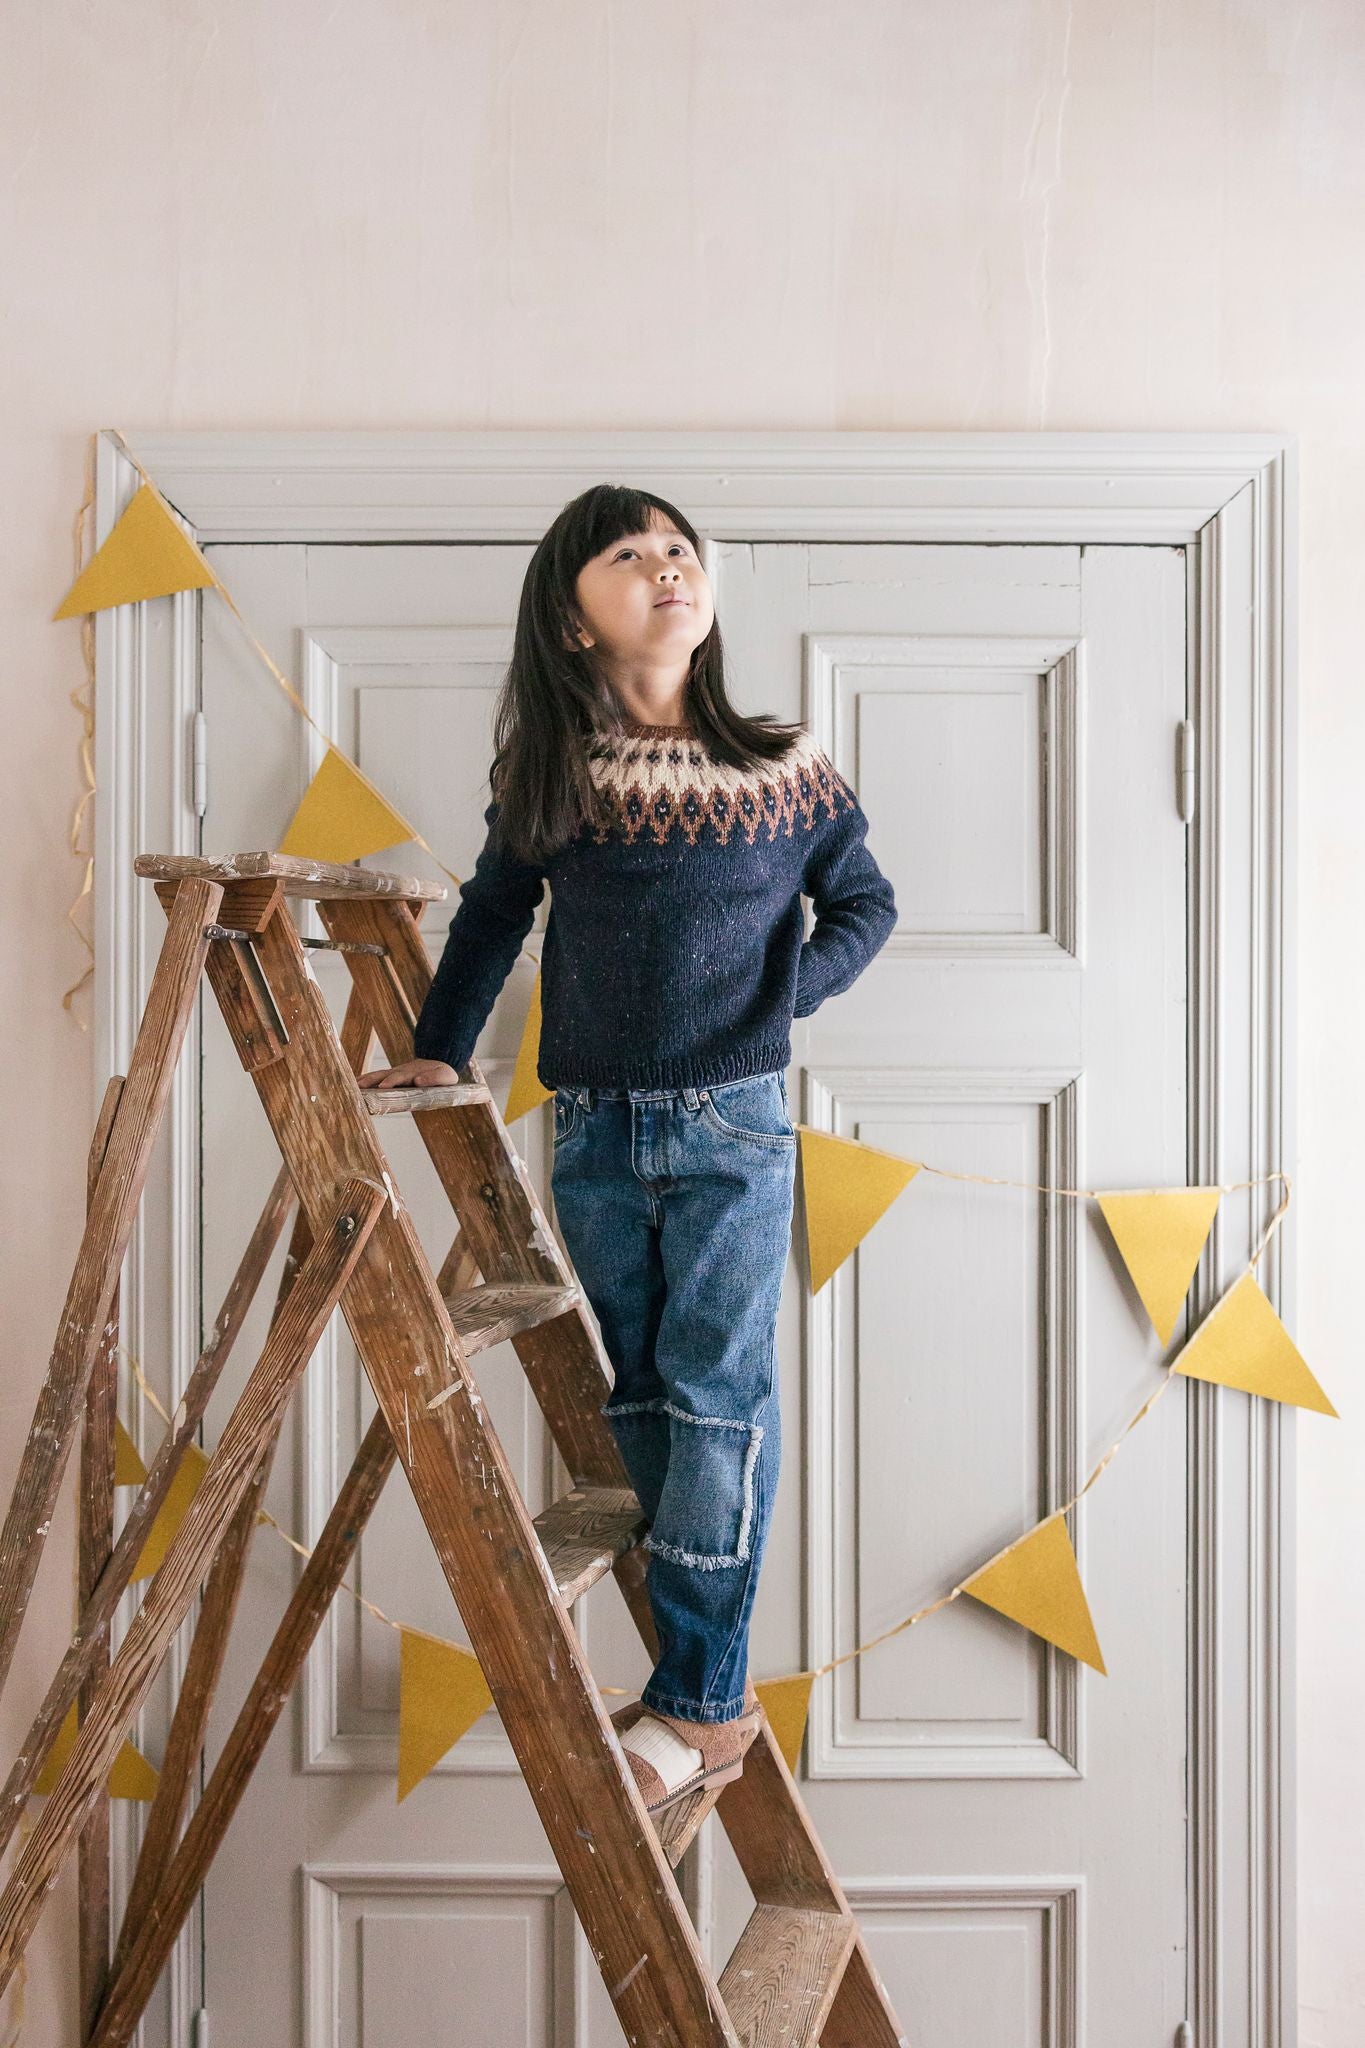 Making Memories: Timeless Knits for Children by Claudia Quintanilla Laine